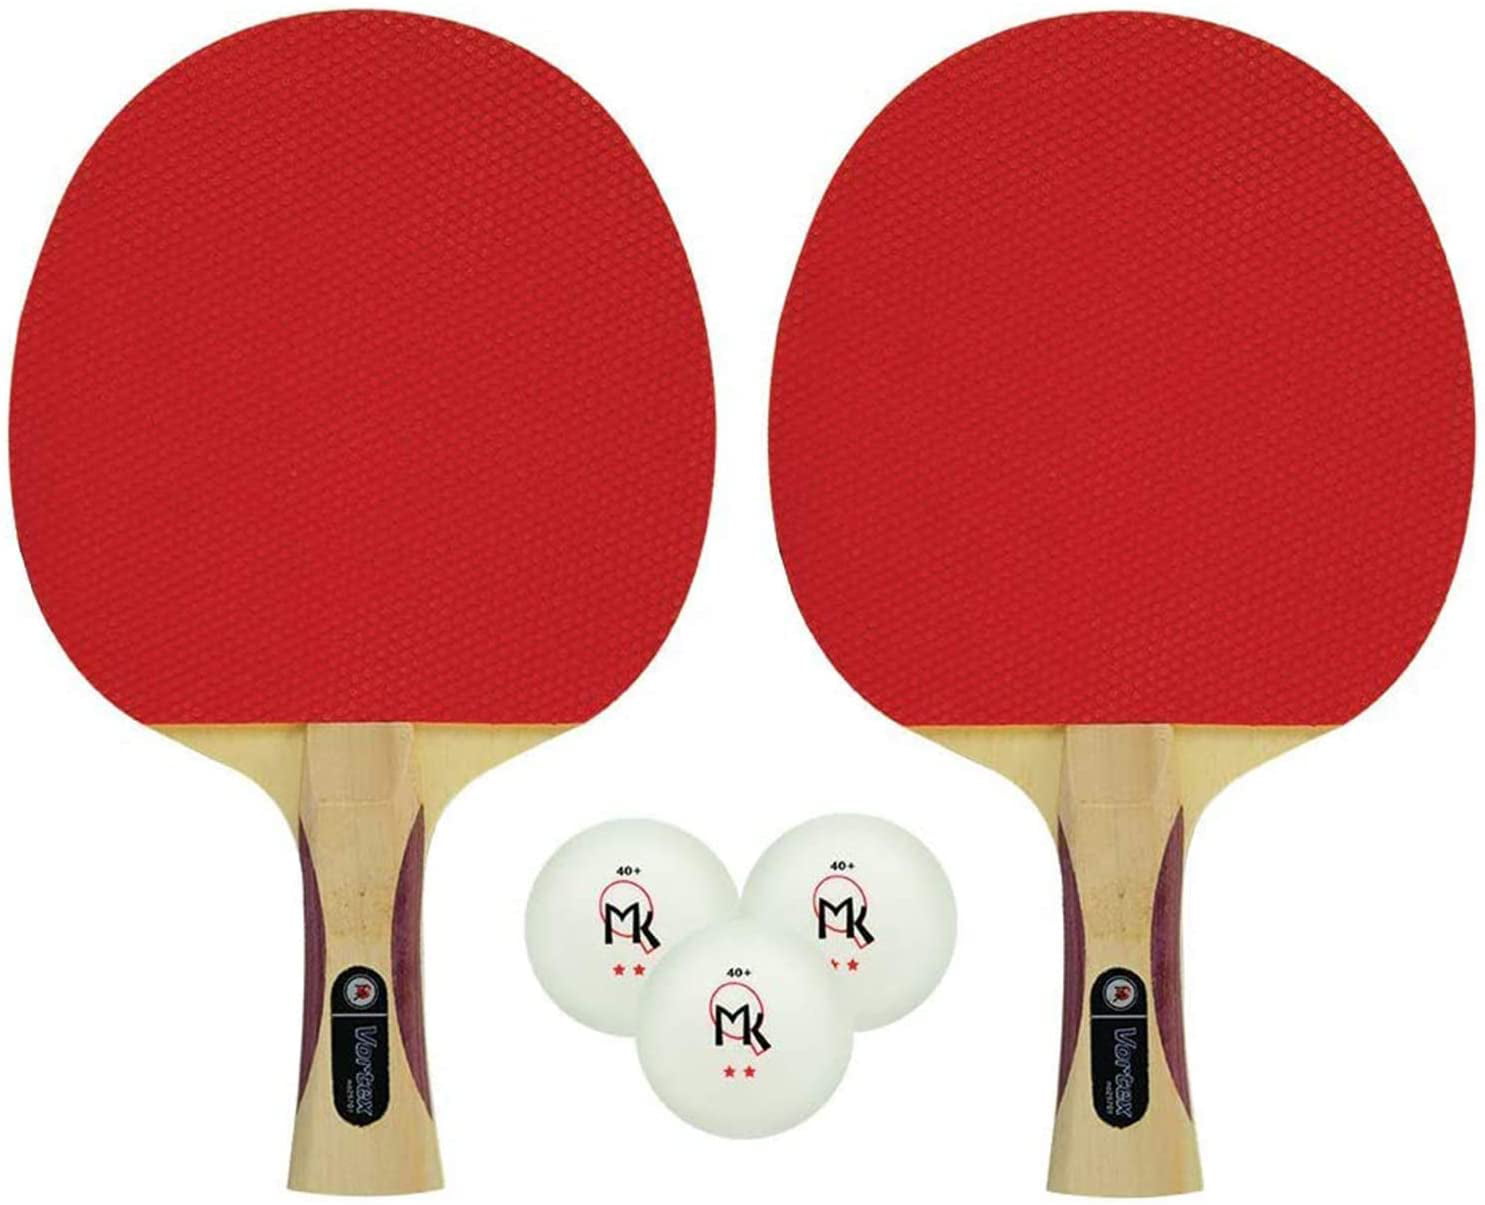 Butterfly Butterfly Flextra Table Tennis Ping Pong Rubber Sponge Red,Black 